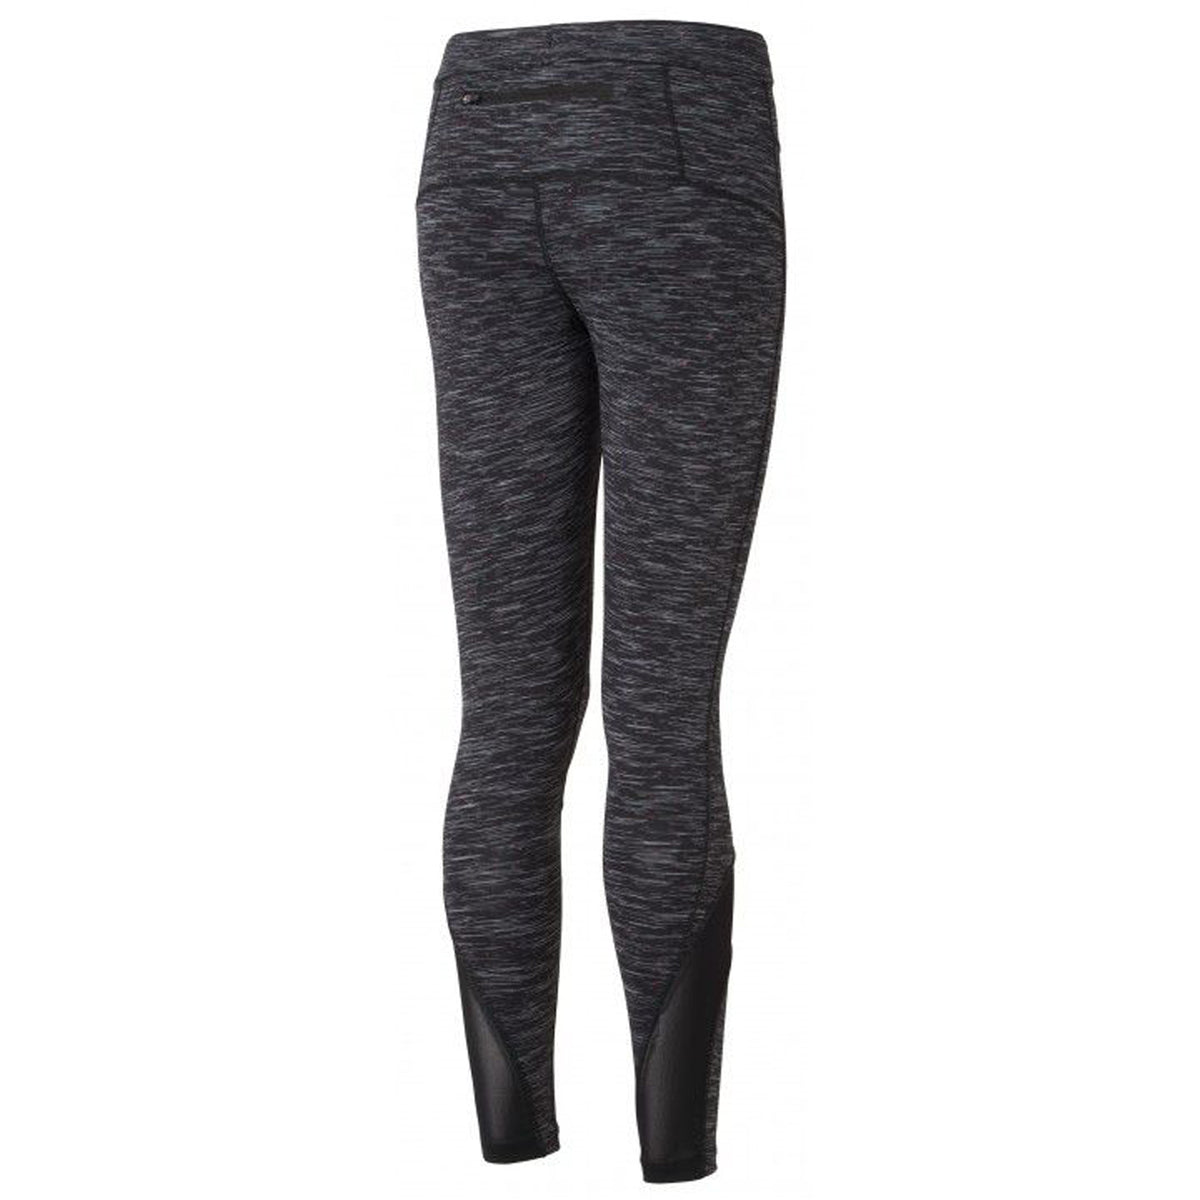 Ronhill Womens Infinity Crop Running Tights